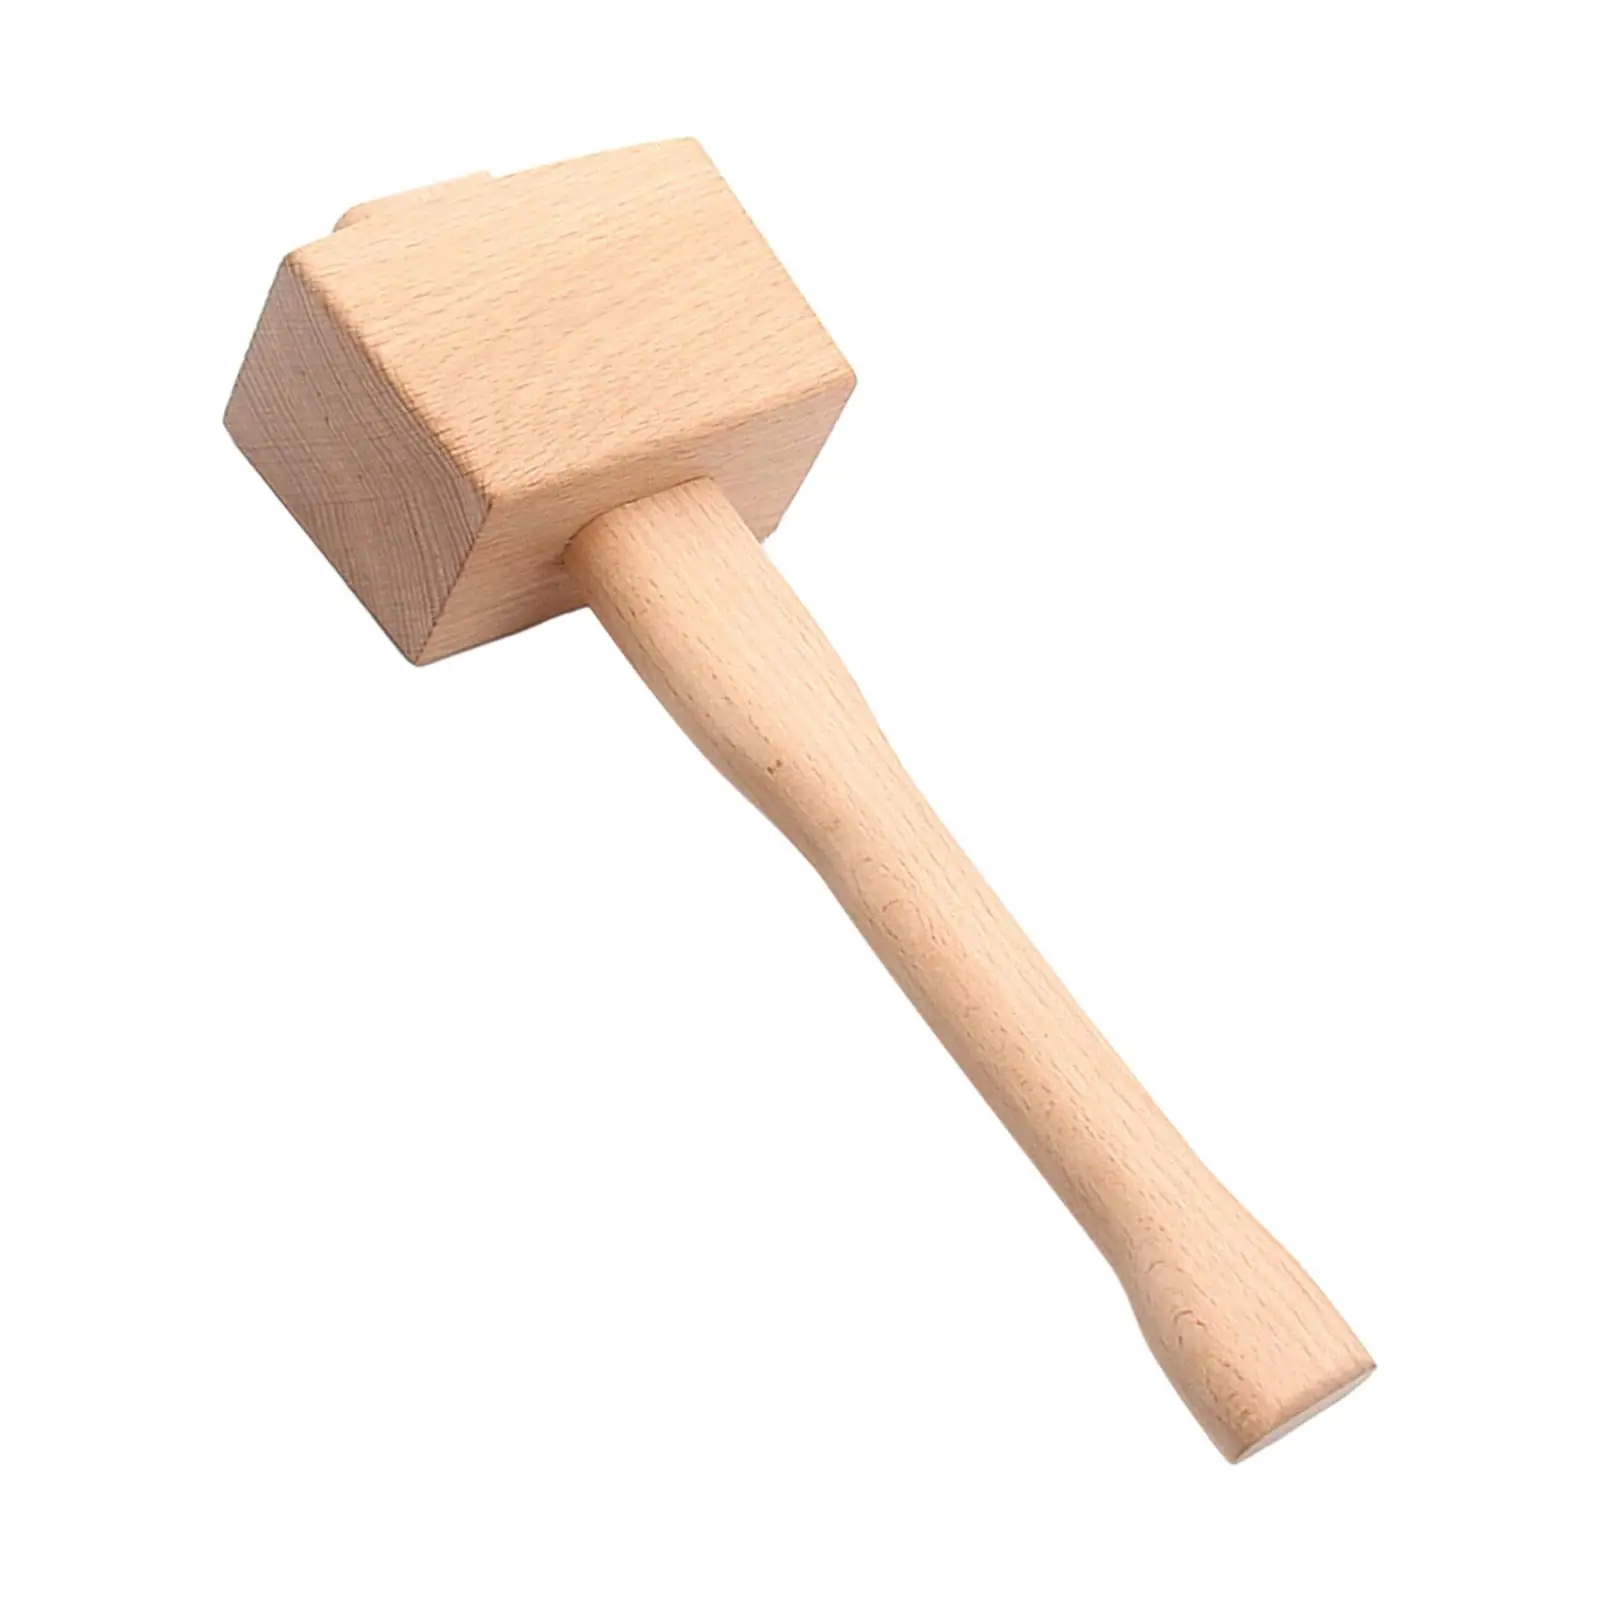 Wooden Hammer Mallet Carving Tool Leather Craft Jewelry Making Hammer Tool